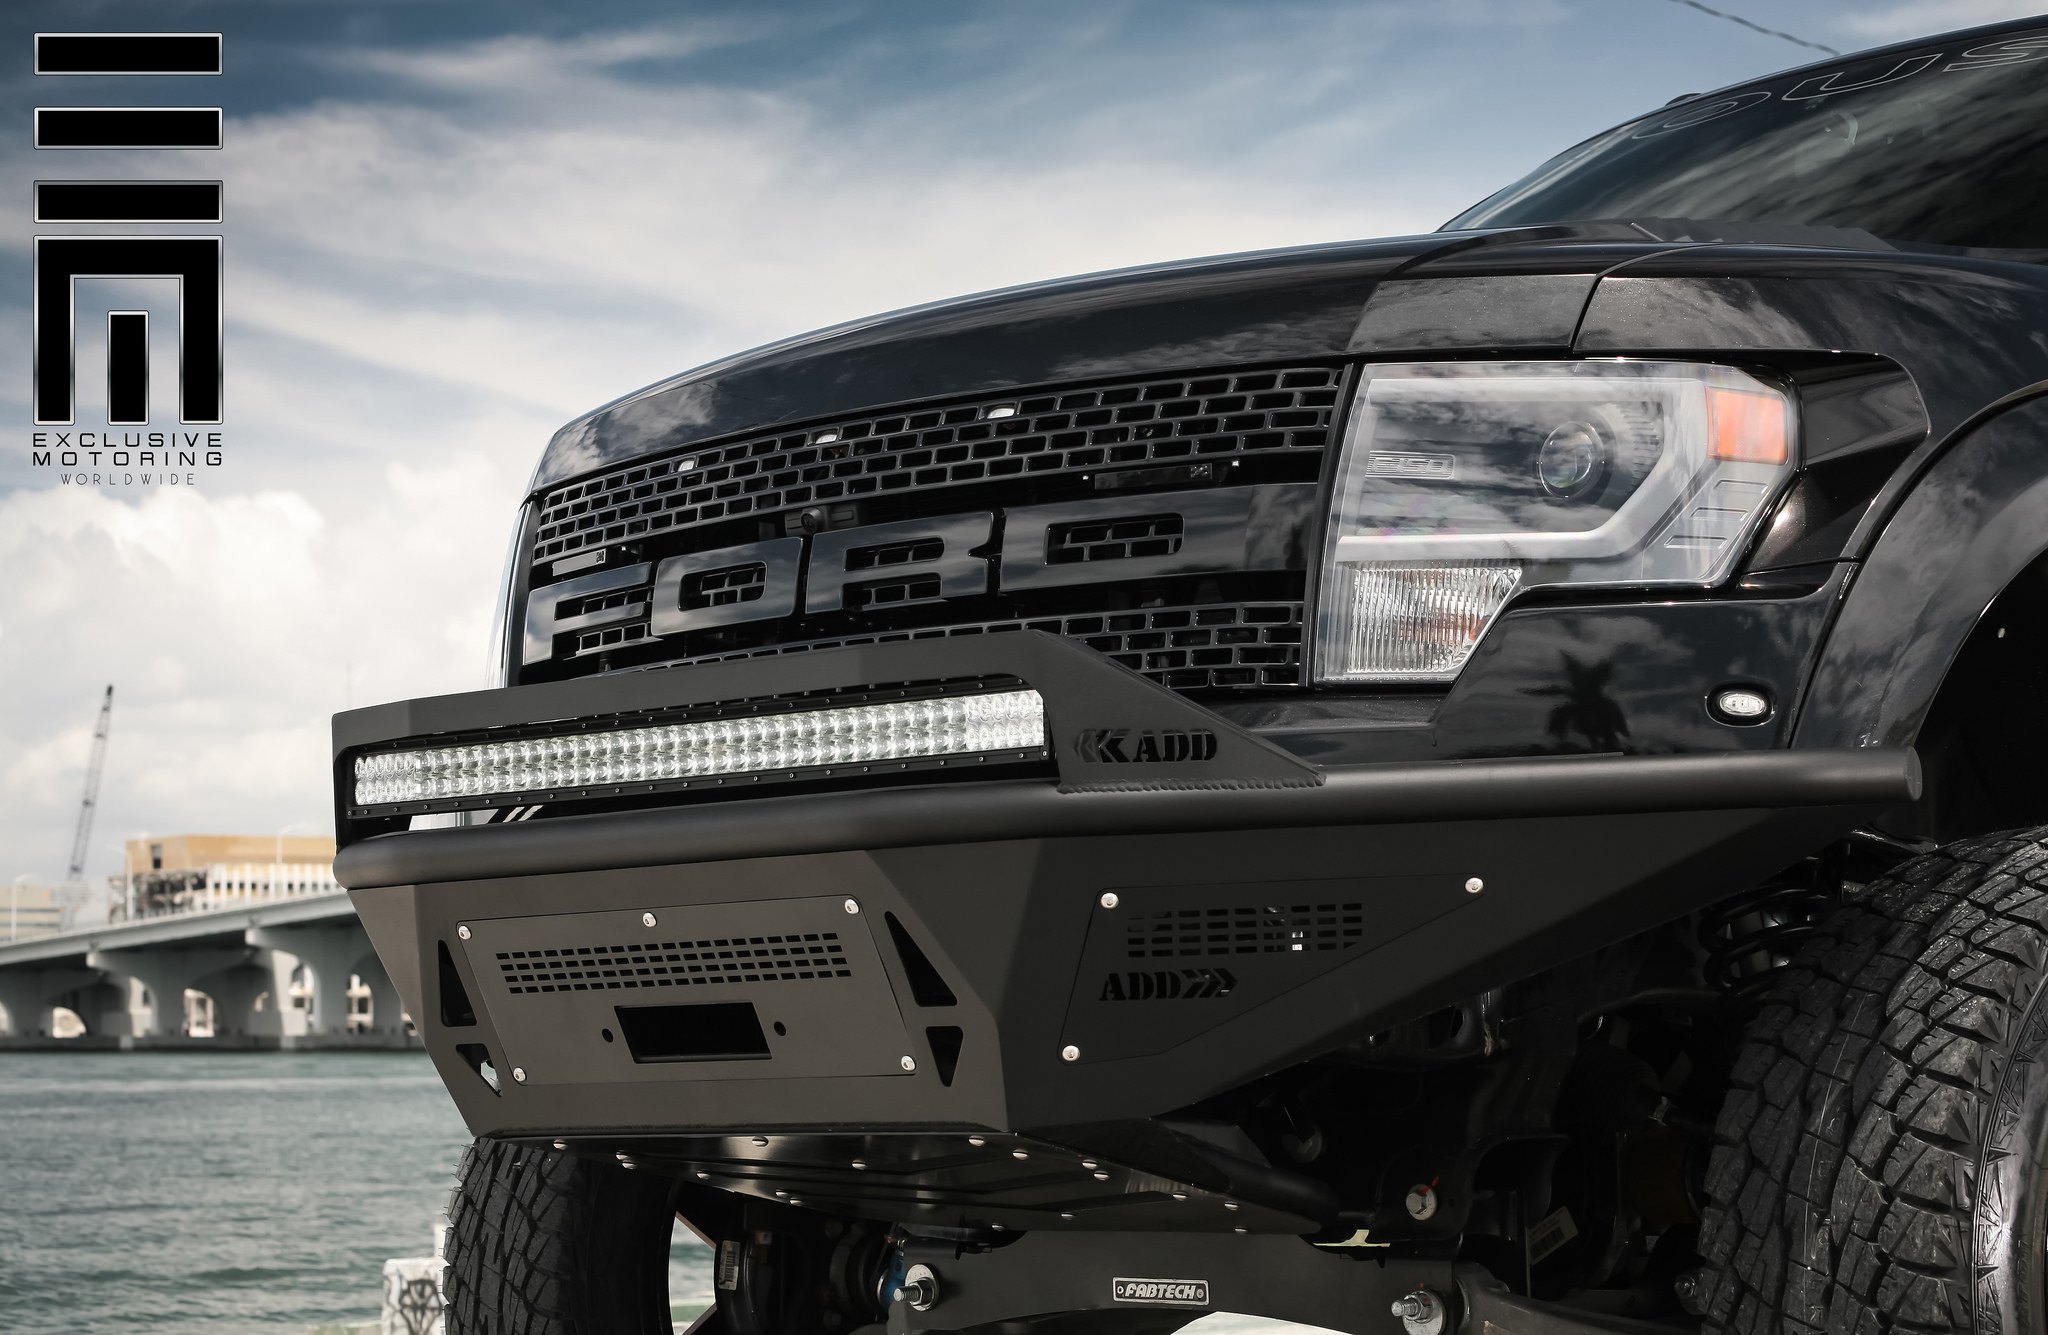 F150 Raptor With ADD Off-road Bumper - Photo by Exclusive Motoring